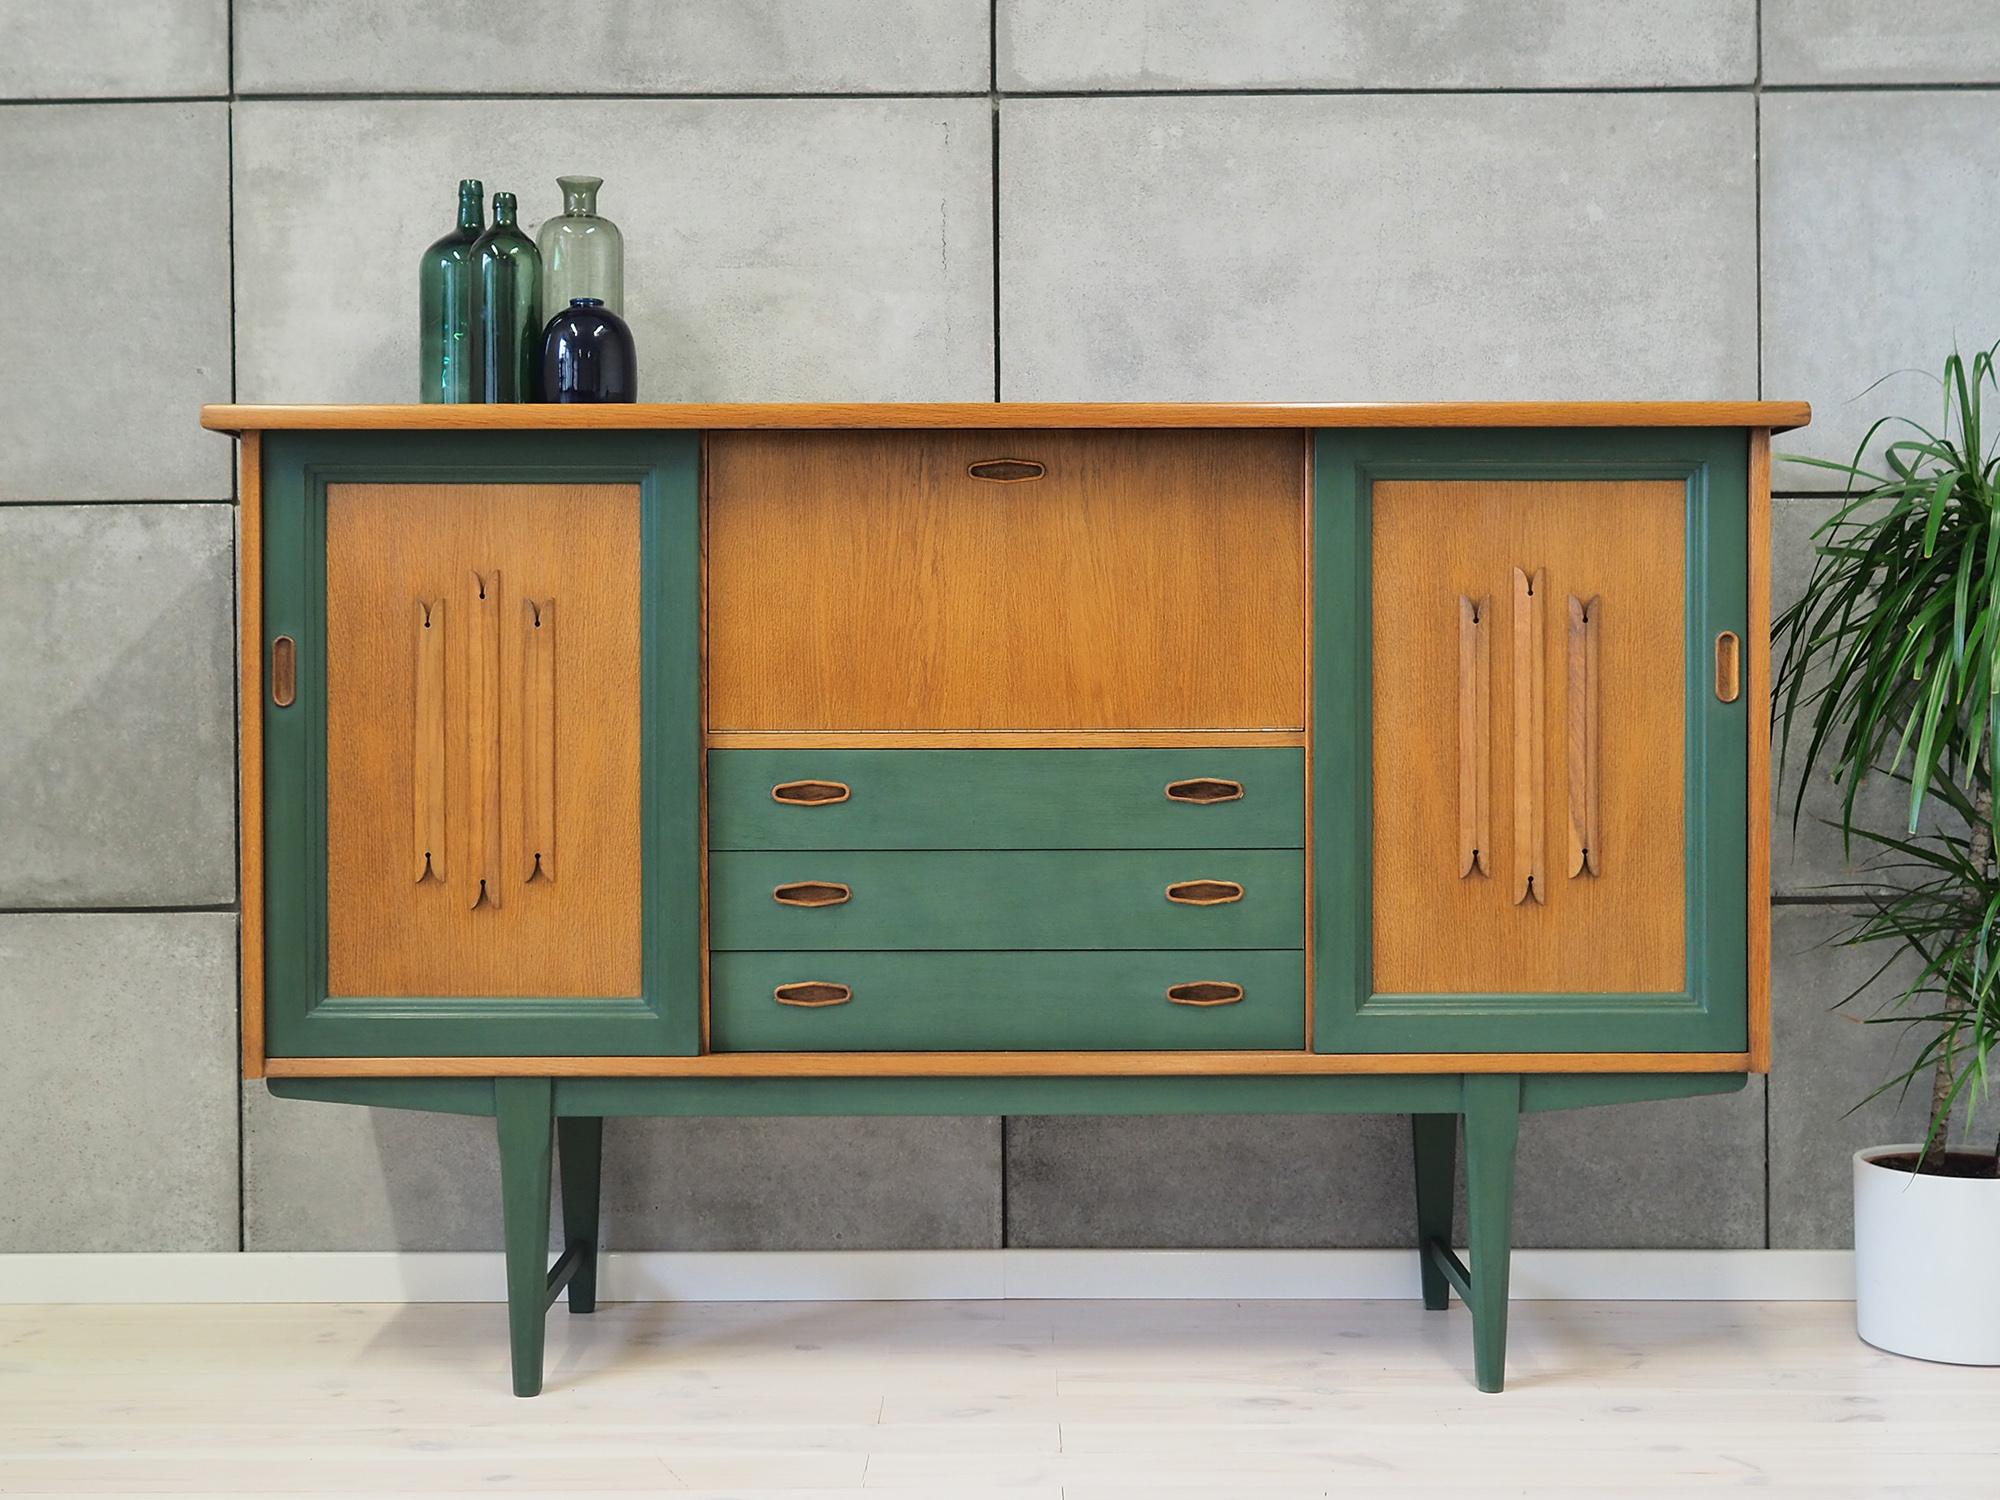 Highboard was made in the 1980s, Danish production.

Structure is covered with oak veneer. Legs made of solid wood painted green. Surface is finished with a shabby chic method. Inside the space has been filled with practical shelves. Inside there